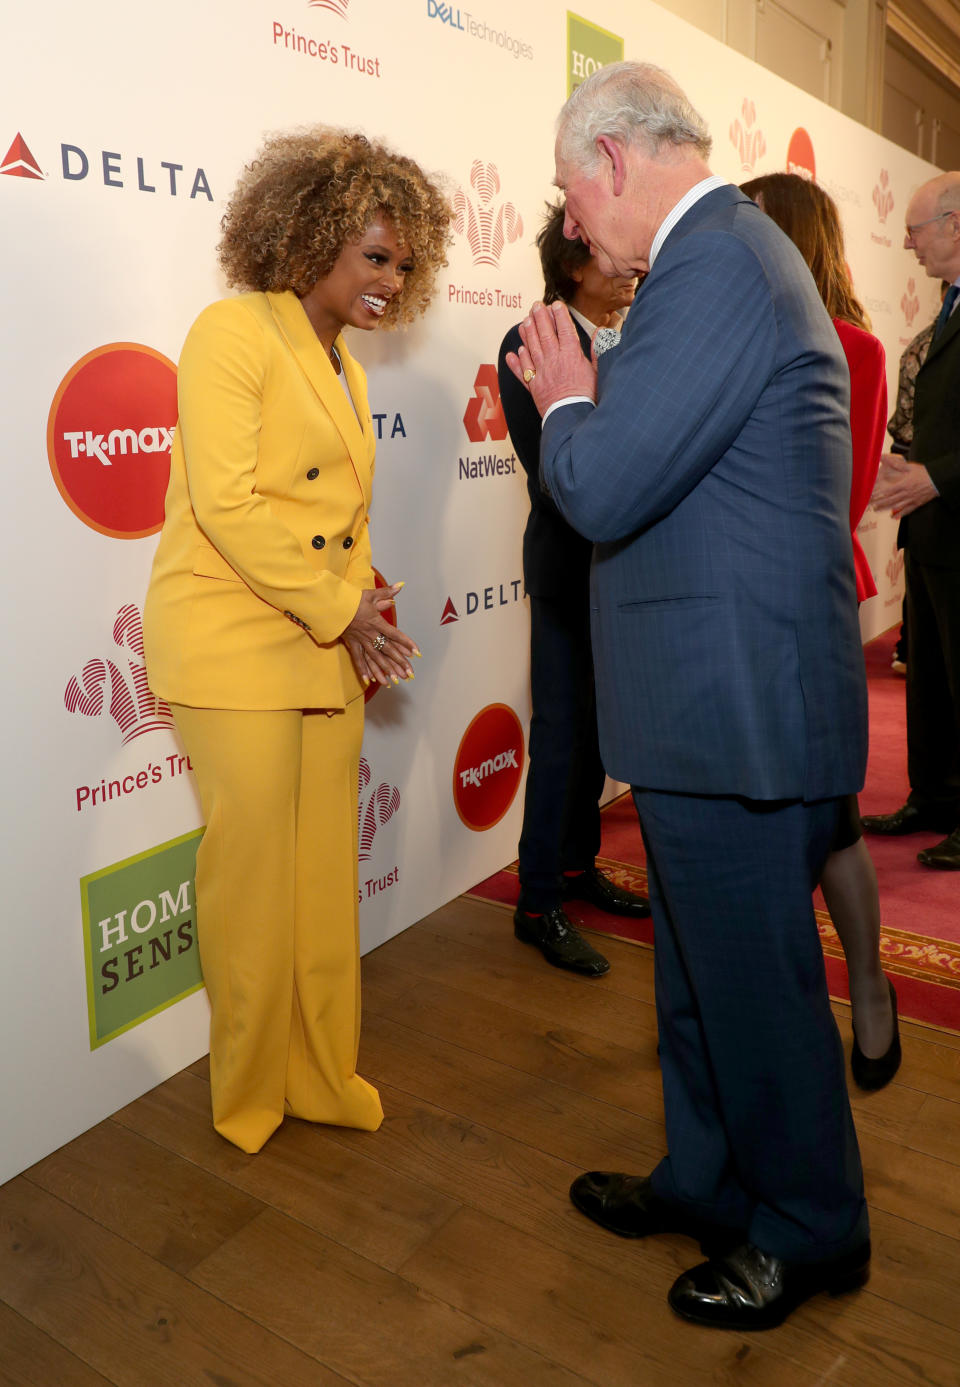 The Prince of Wales uses the Namaste gesture to greet Fleur East as he arrives at the annual Prince's Trust Awards 2020 held at the London Palladium.